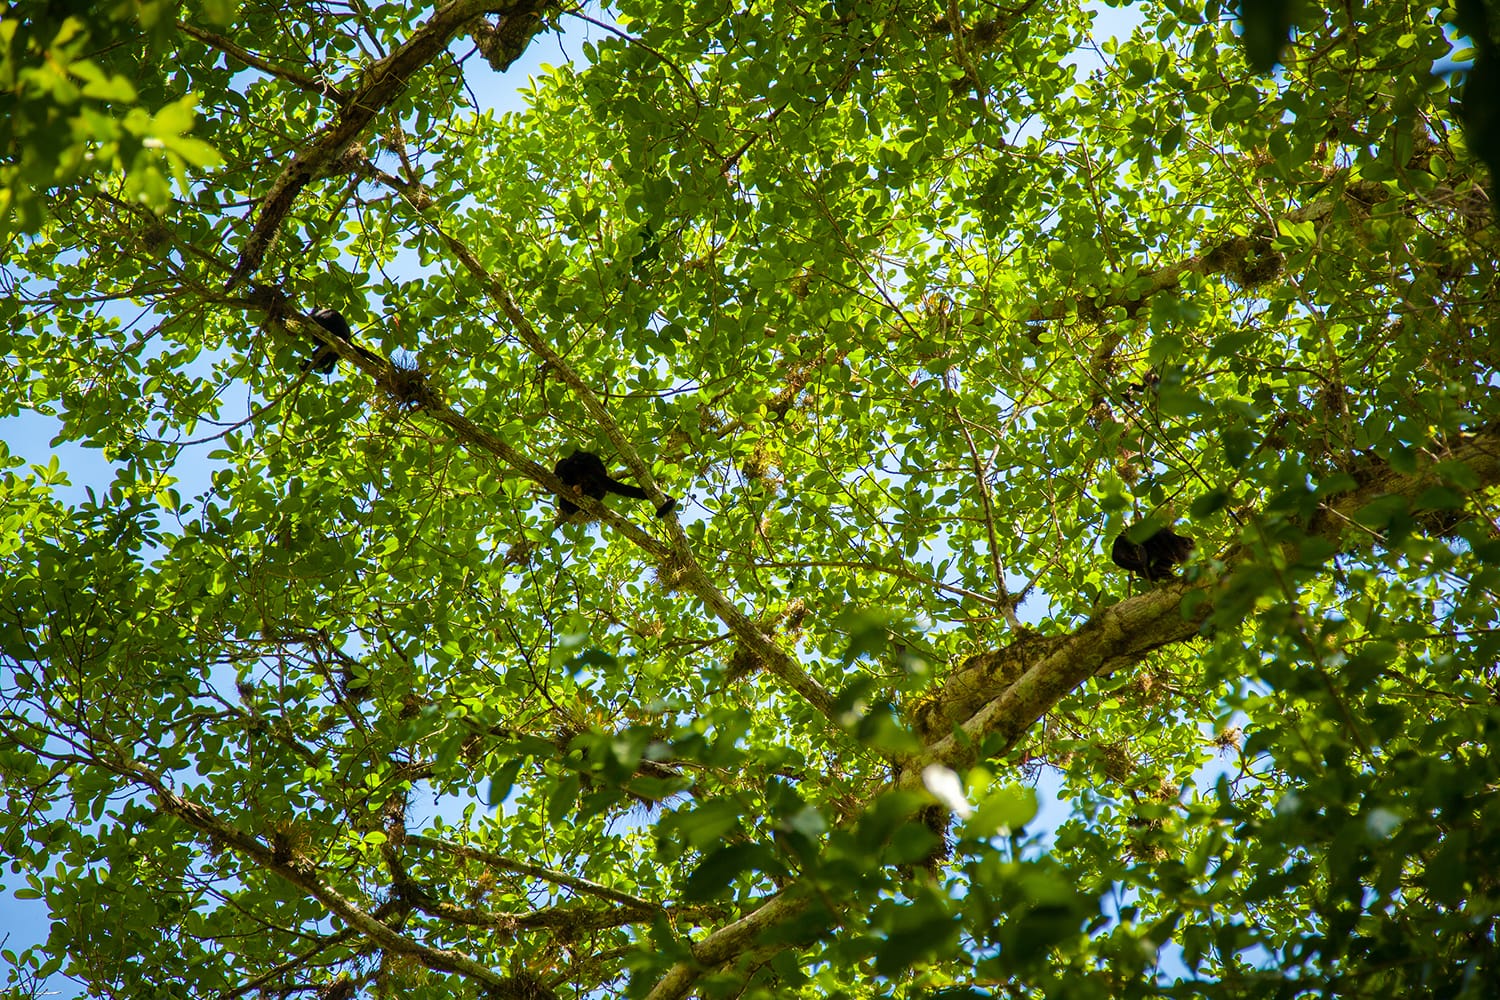 A family of spider monkey on the tropical forest in Tikal, Peten Guatemala